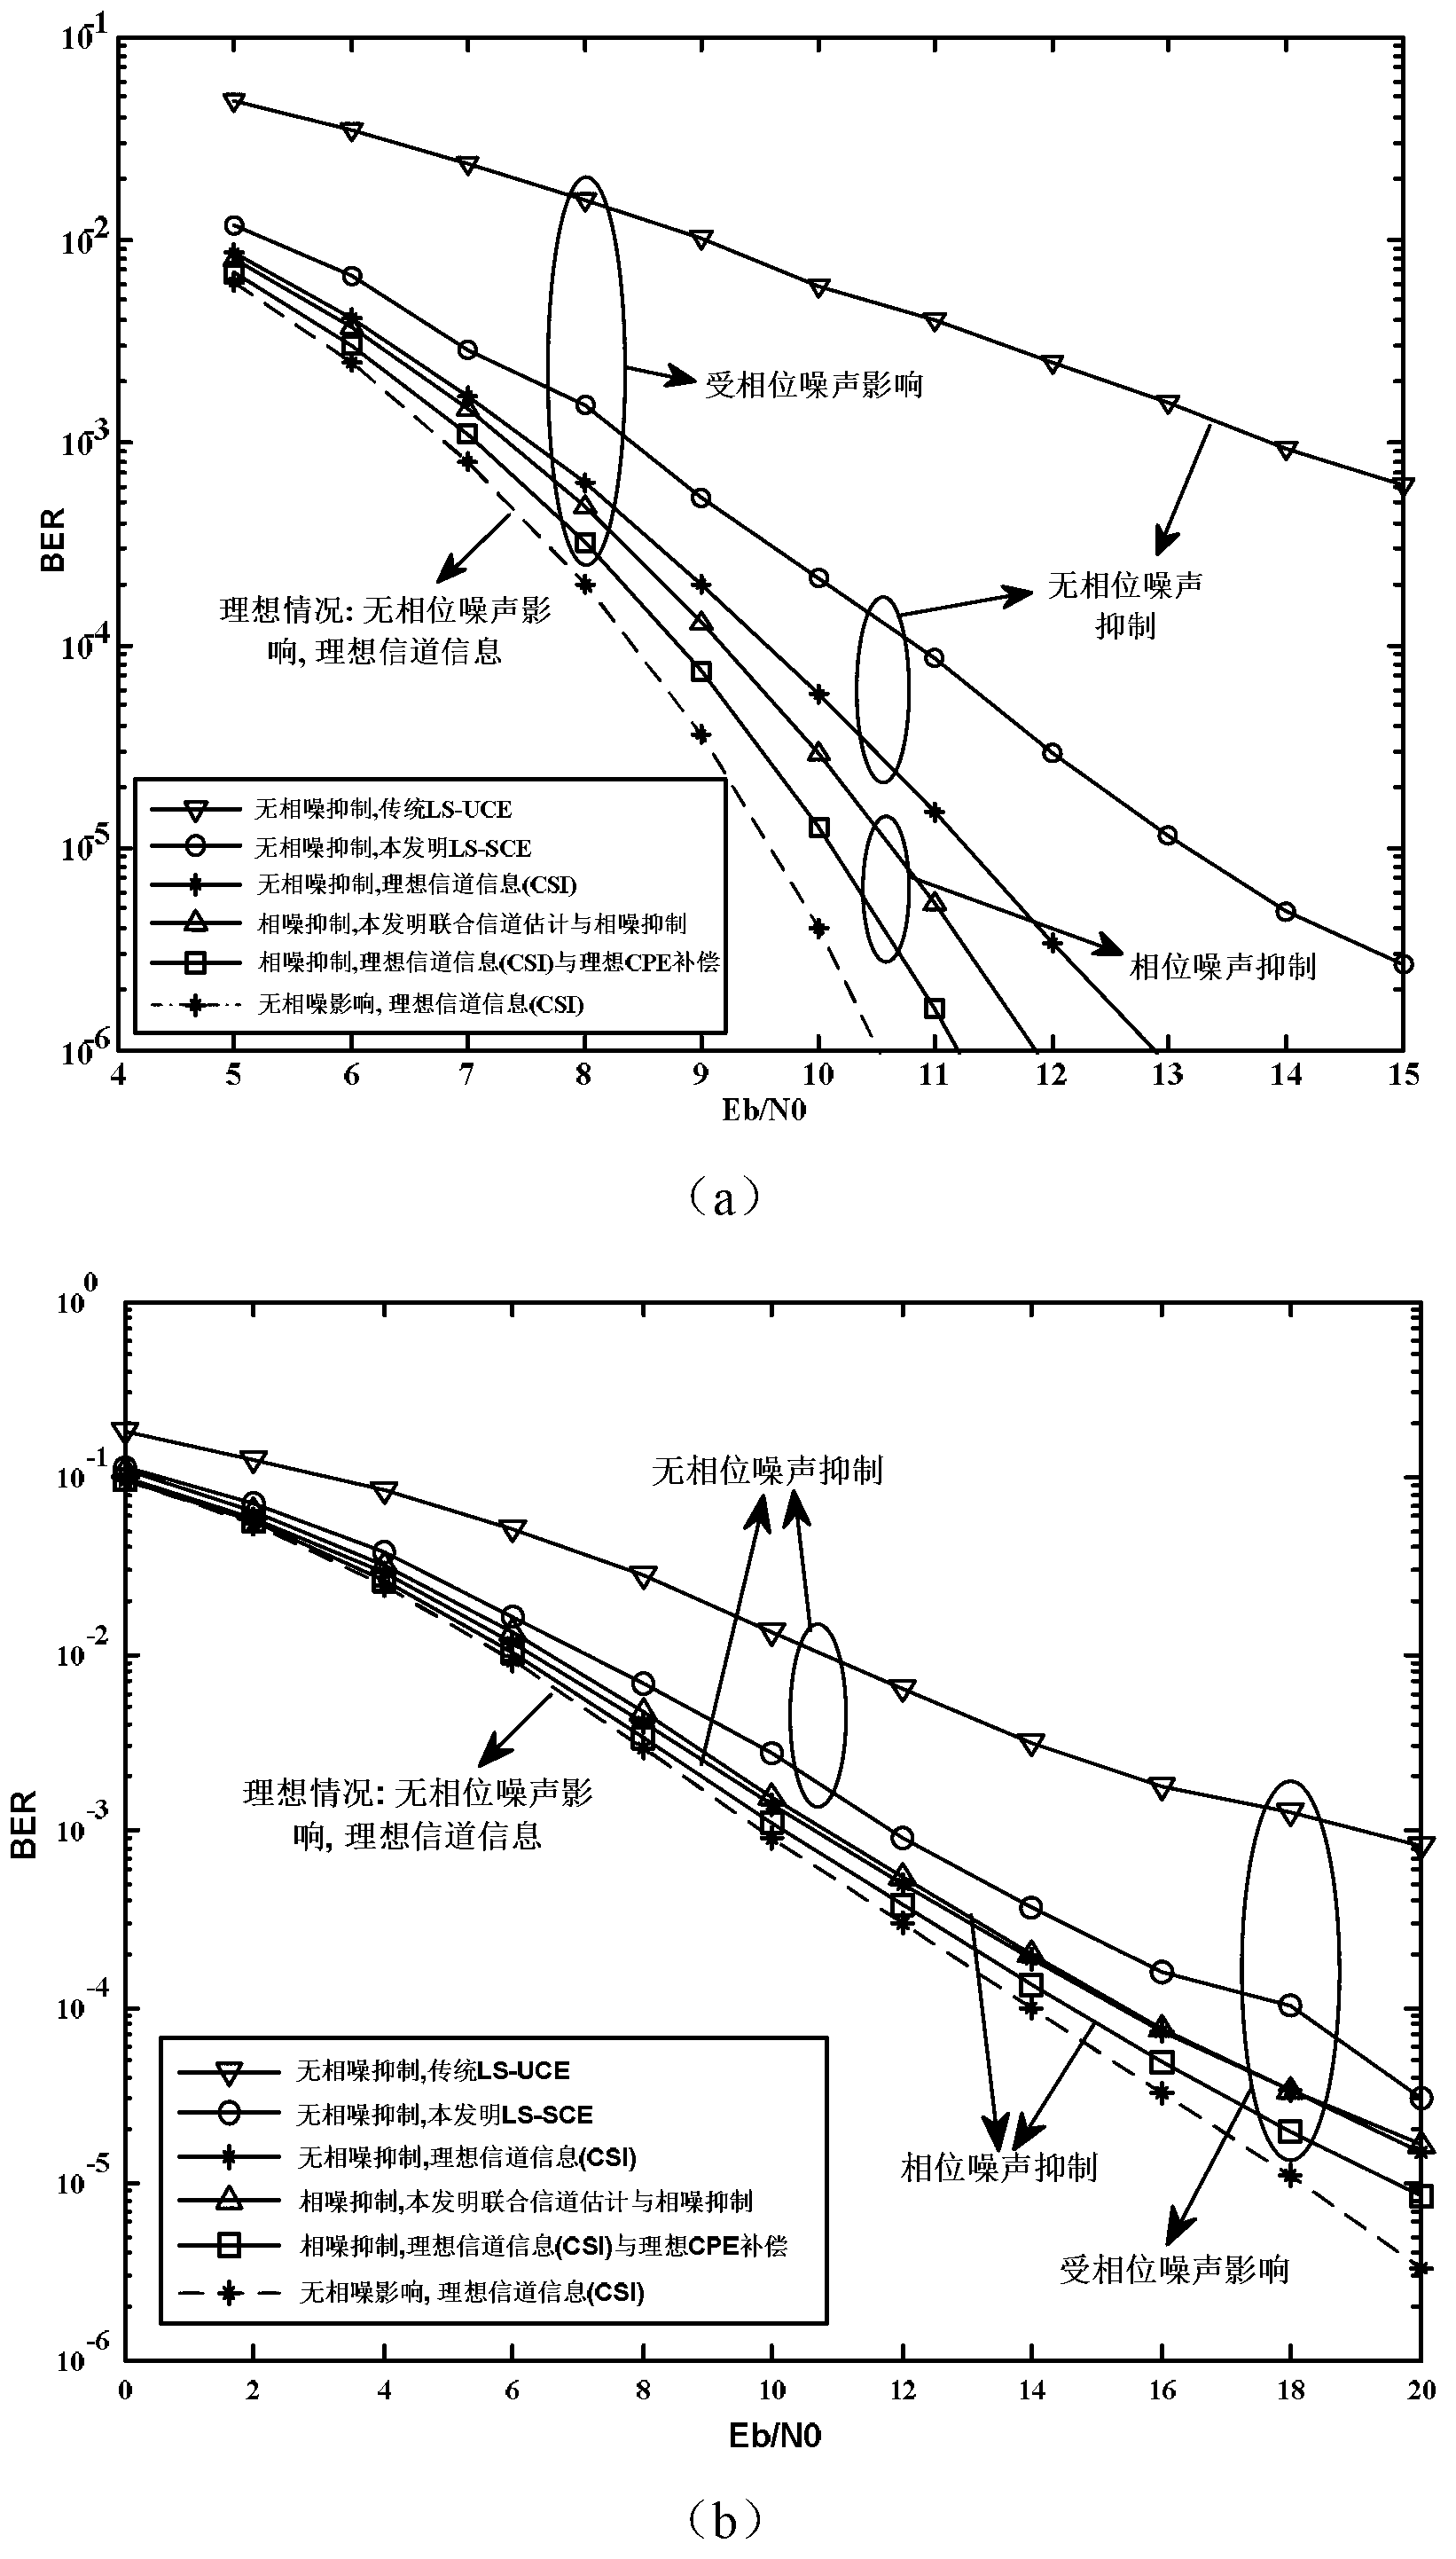 Phase noise suppression method under low-complexity channel estimation of SC-FDE (single carrier-frequency domain equalization) system